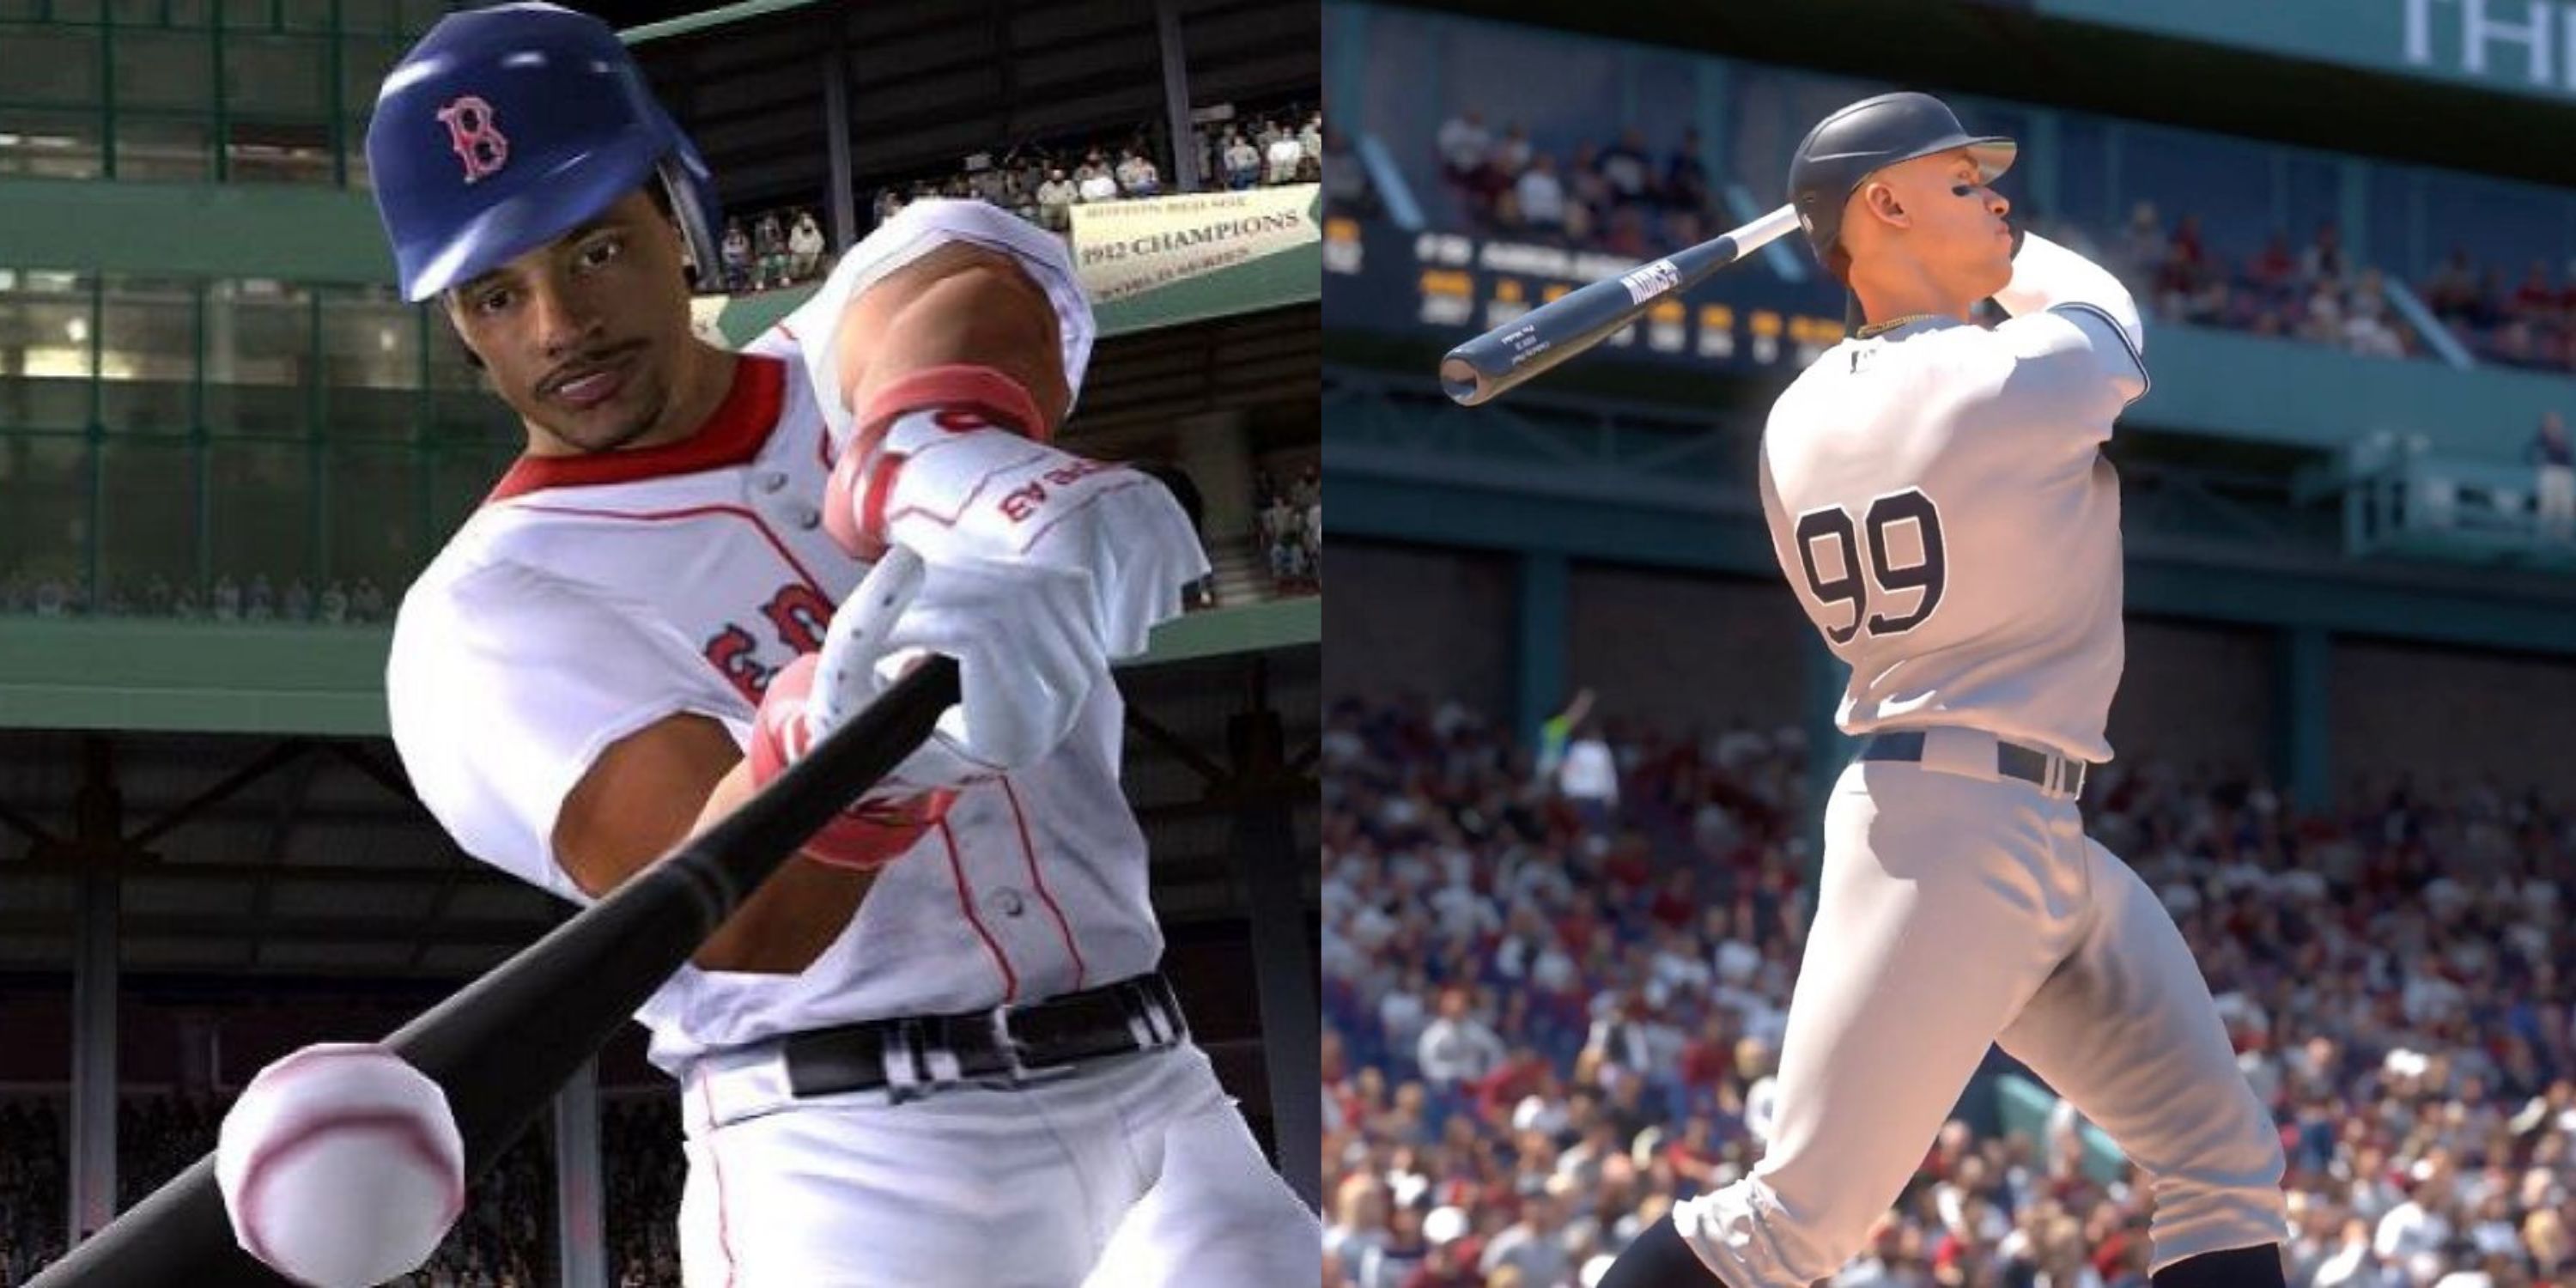 The 10 Best Baseball Video Games Ever, According To Reddit